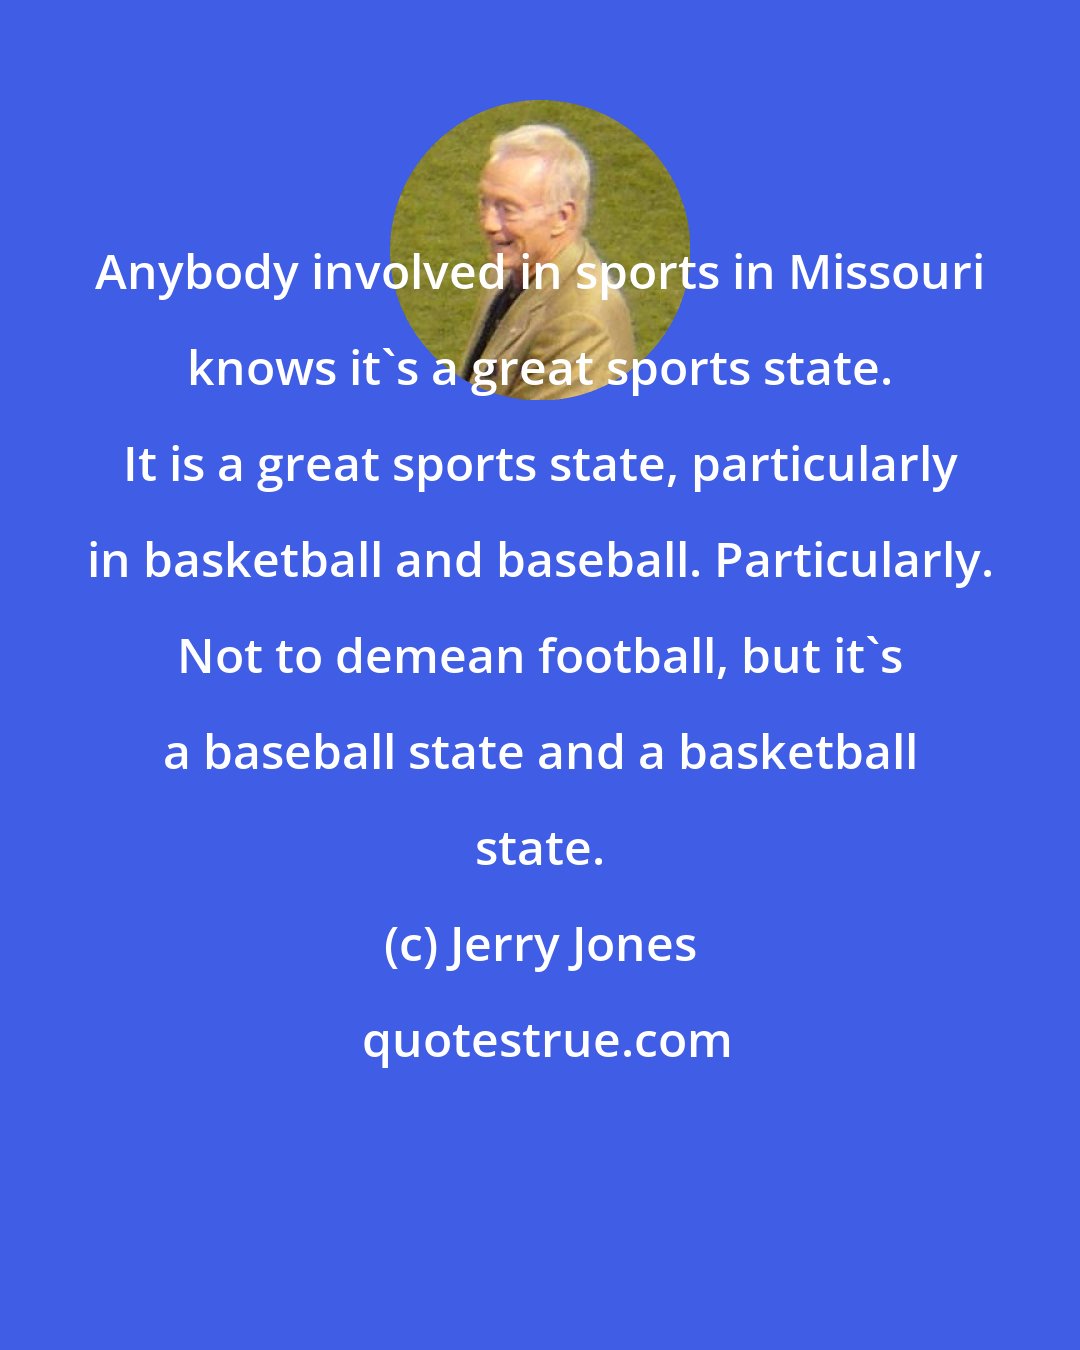 Jerry Jones: Anybody involved in sports in Missouri knows it's a great sports state. It is a great sports state, particularly in basketball and baseball. Particularly. Not to demean football, but it's a baseball state and a basketball state.